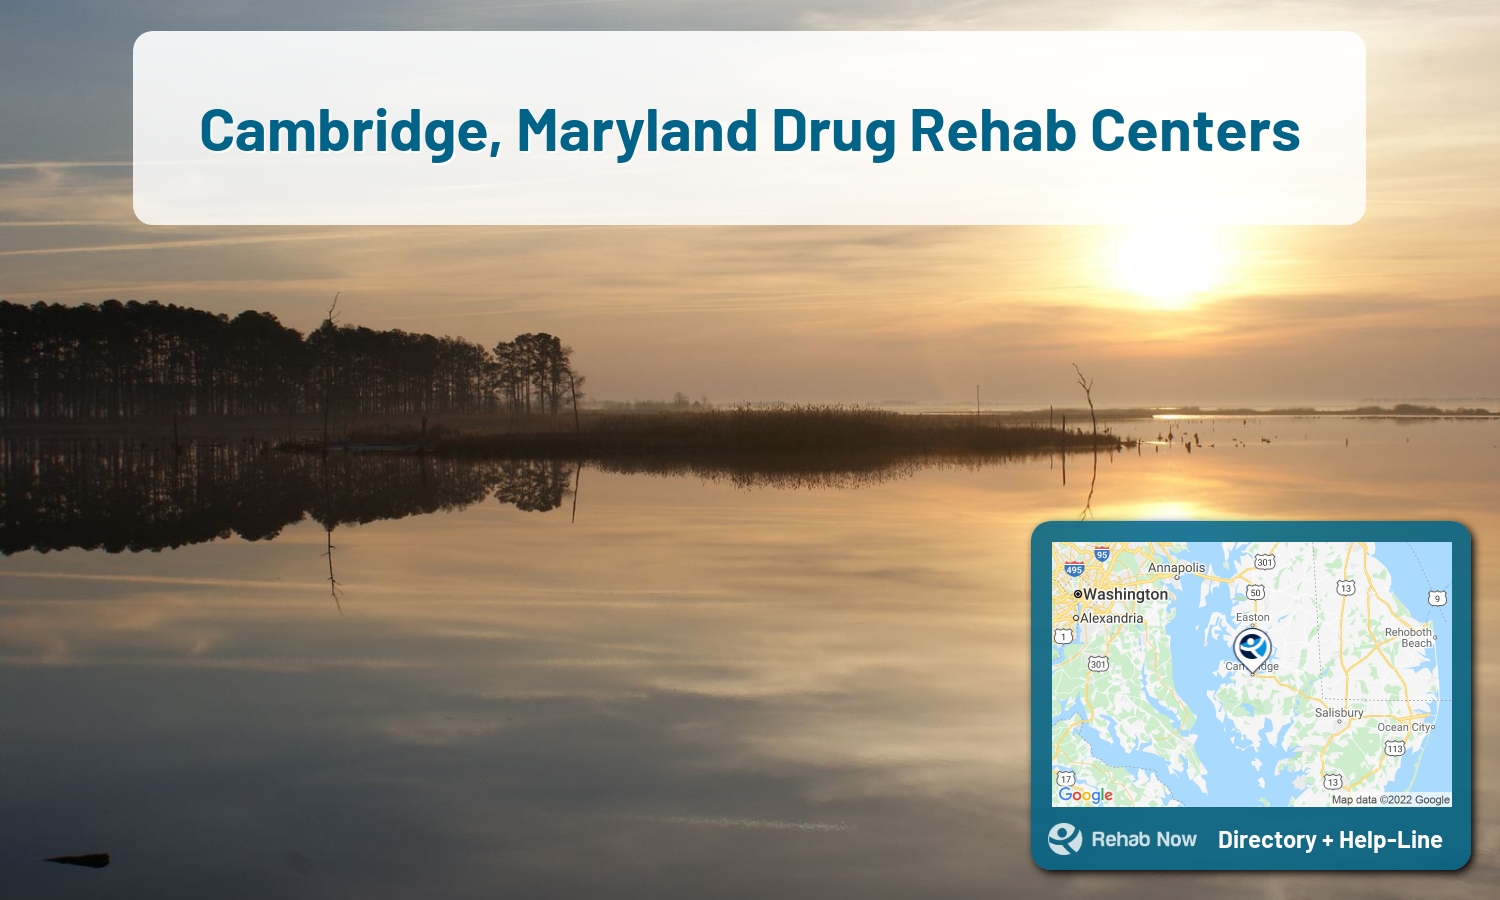 Those struggling with addiction can find help through addiction rehab facilities in Cambridge, MD. Get help now!